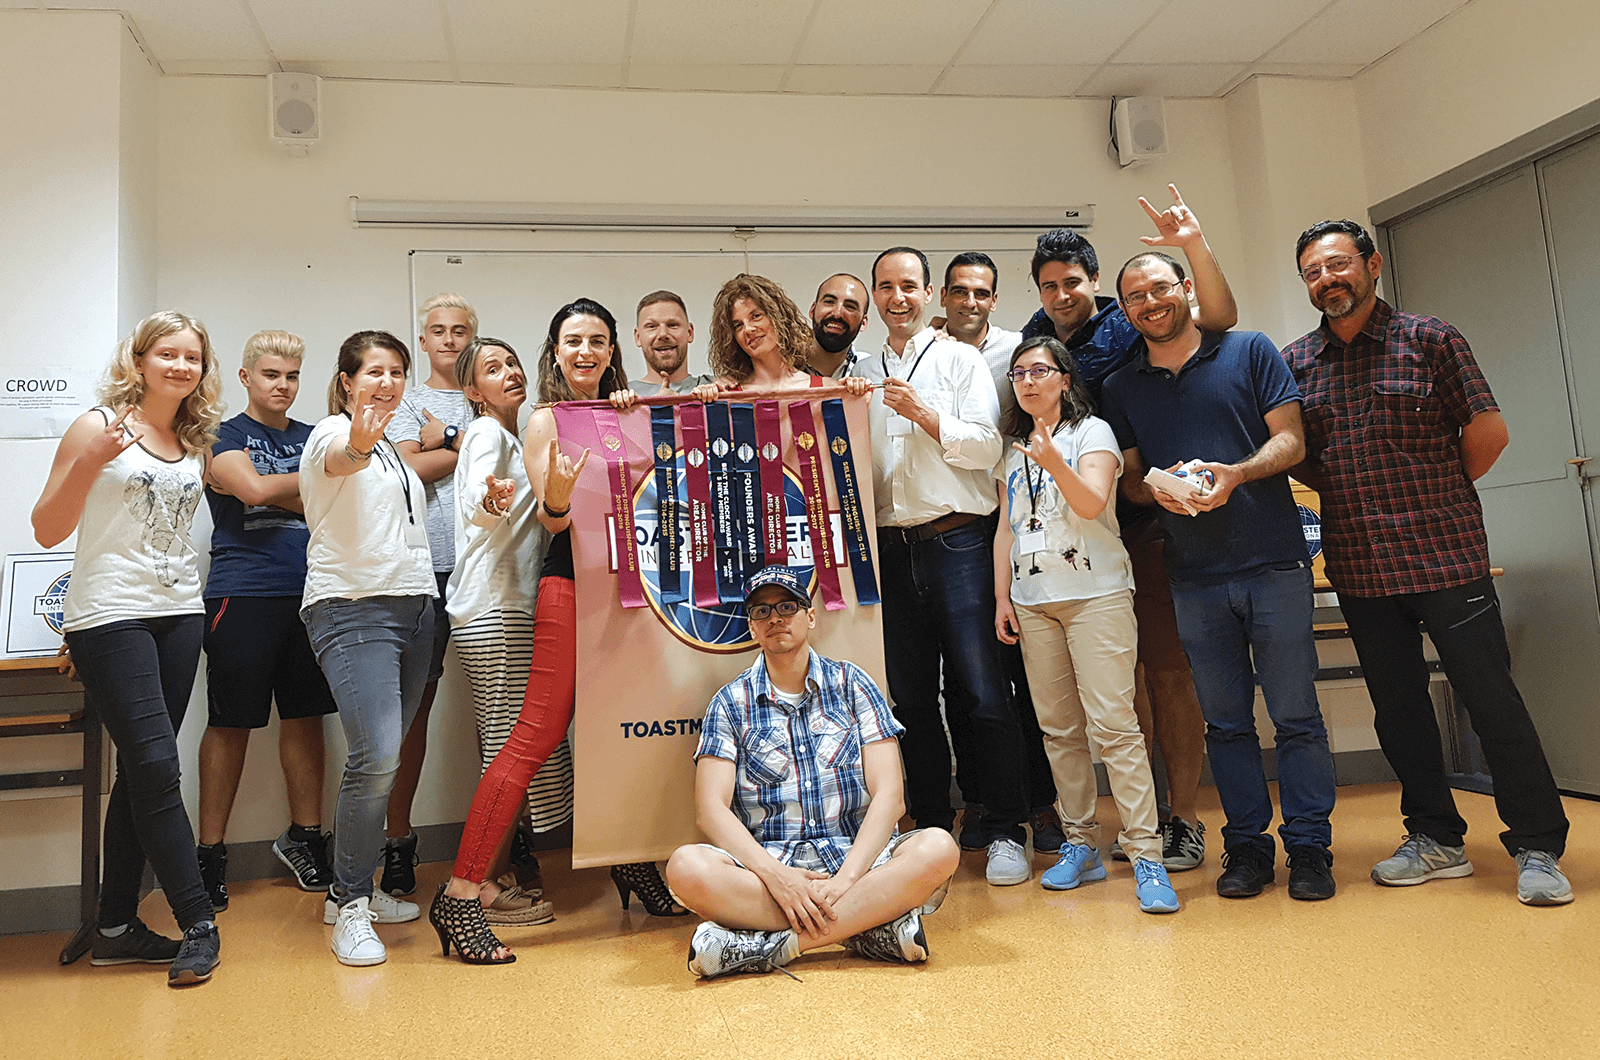 Group of Toastmasters members in Spain pose with banner